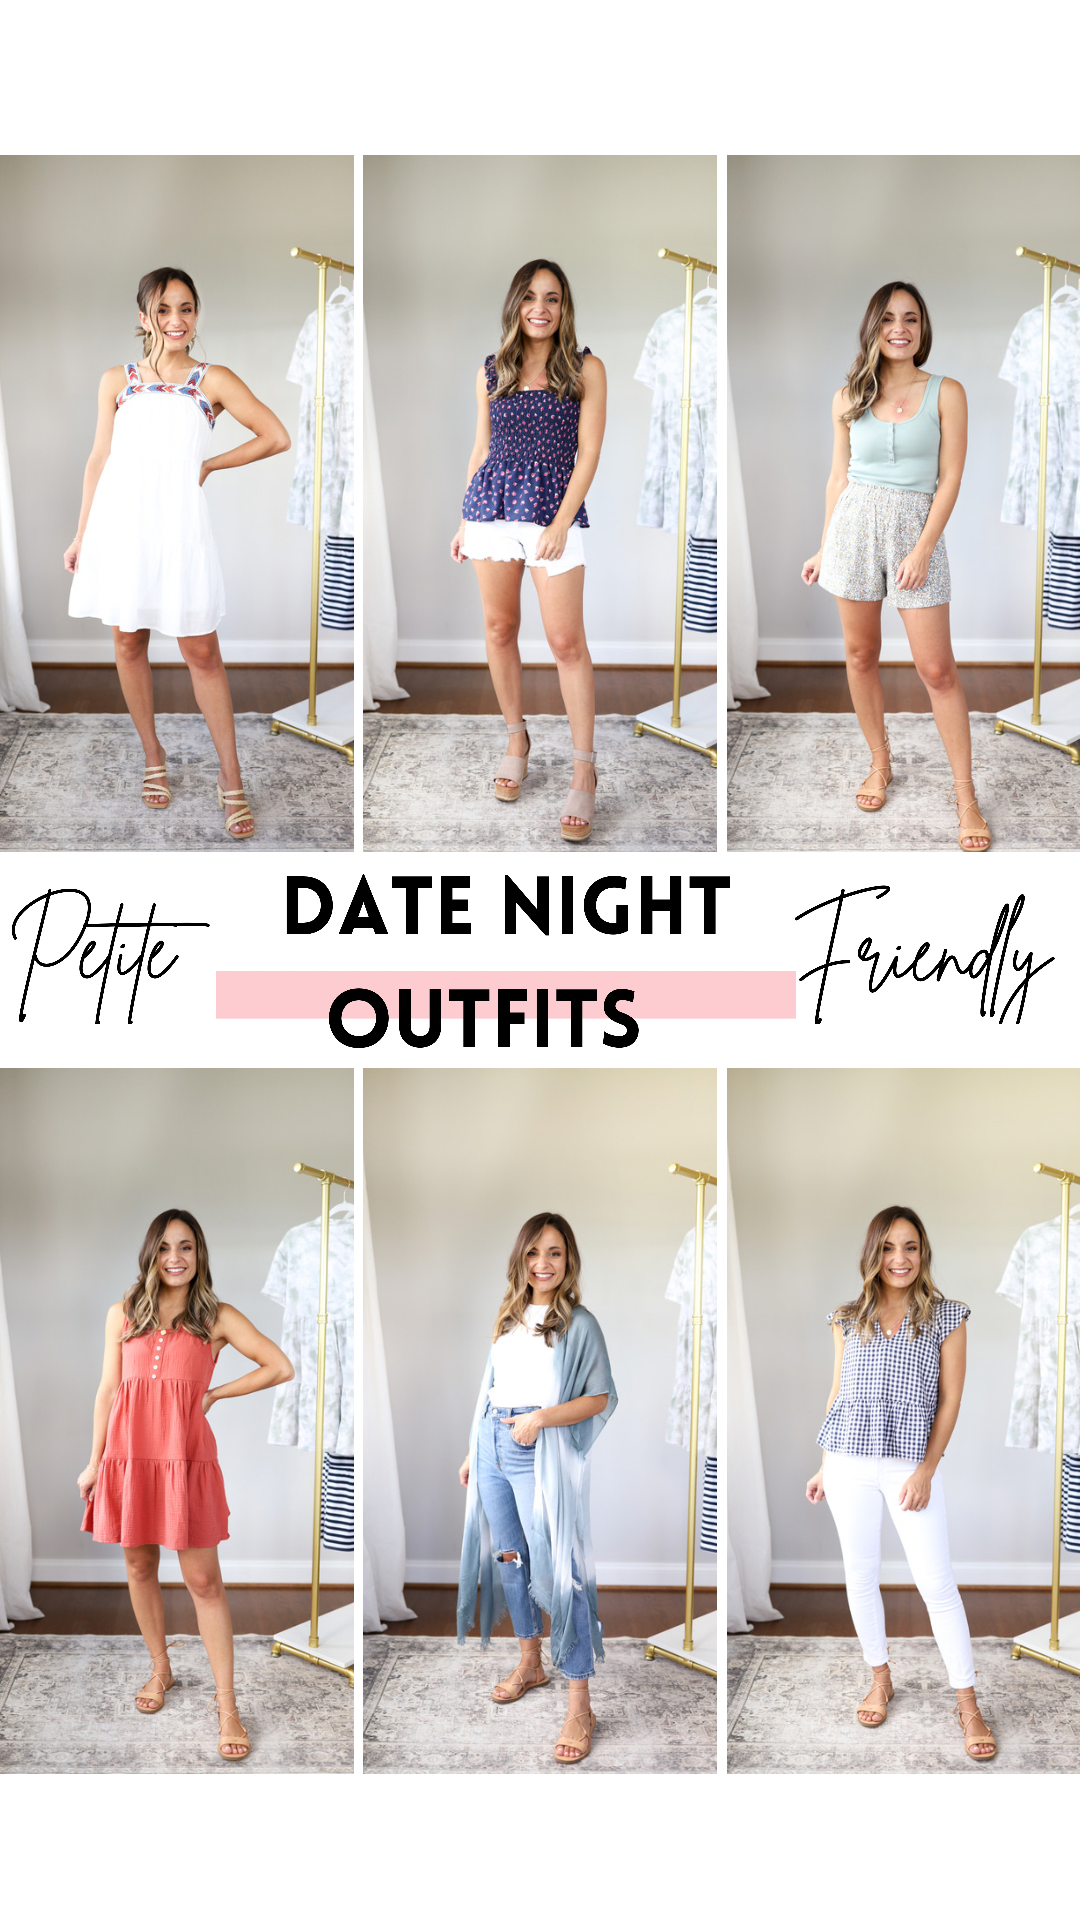 Date Night Outfits by Occasion - Pumps & Push Ups